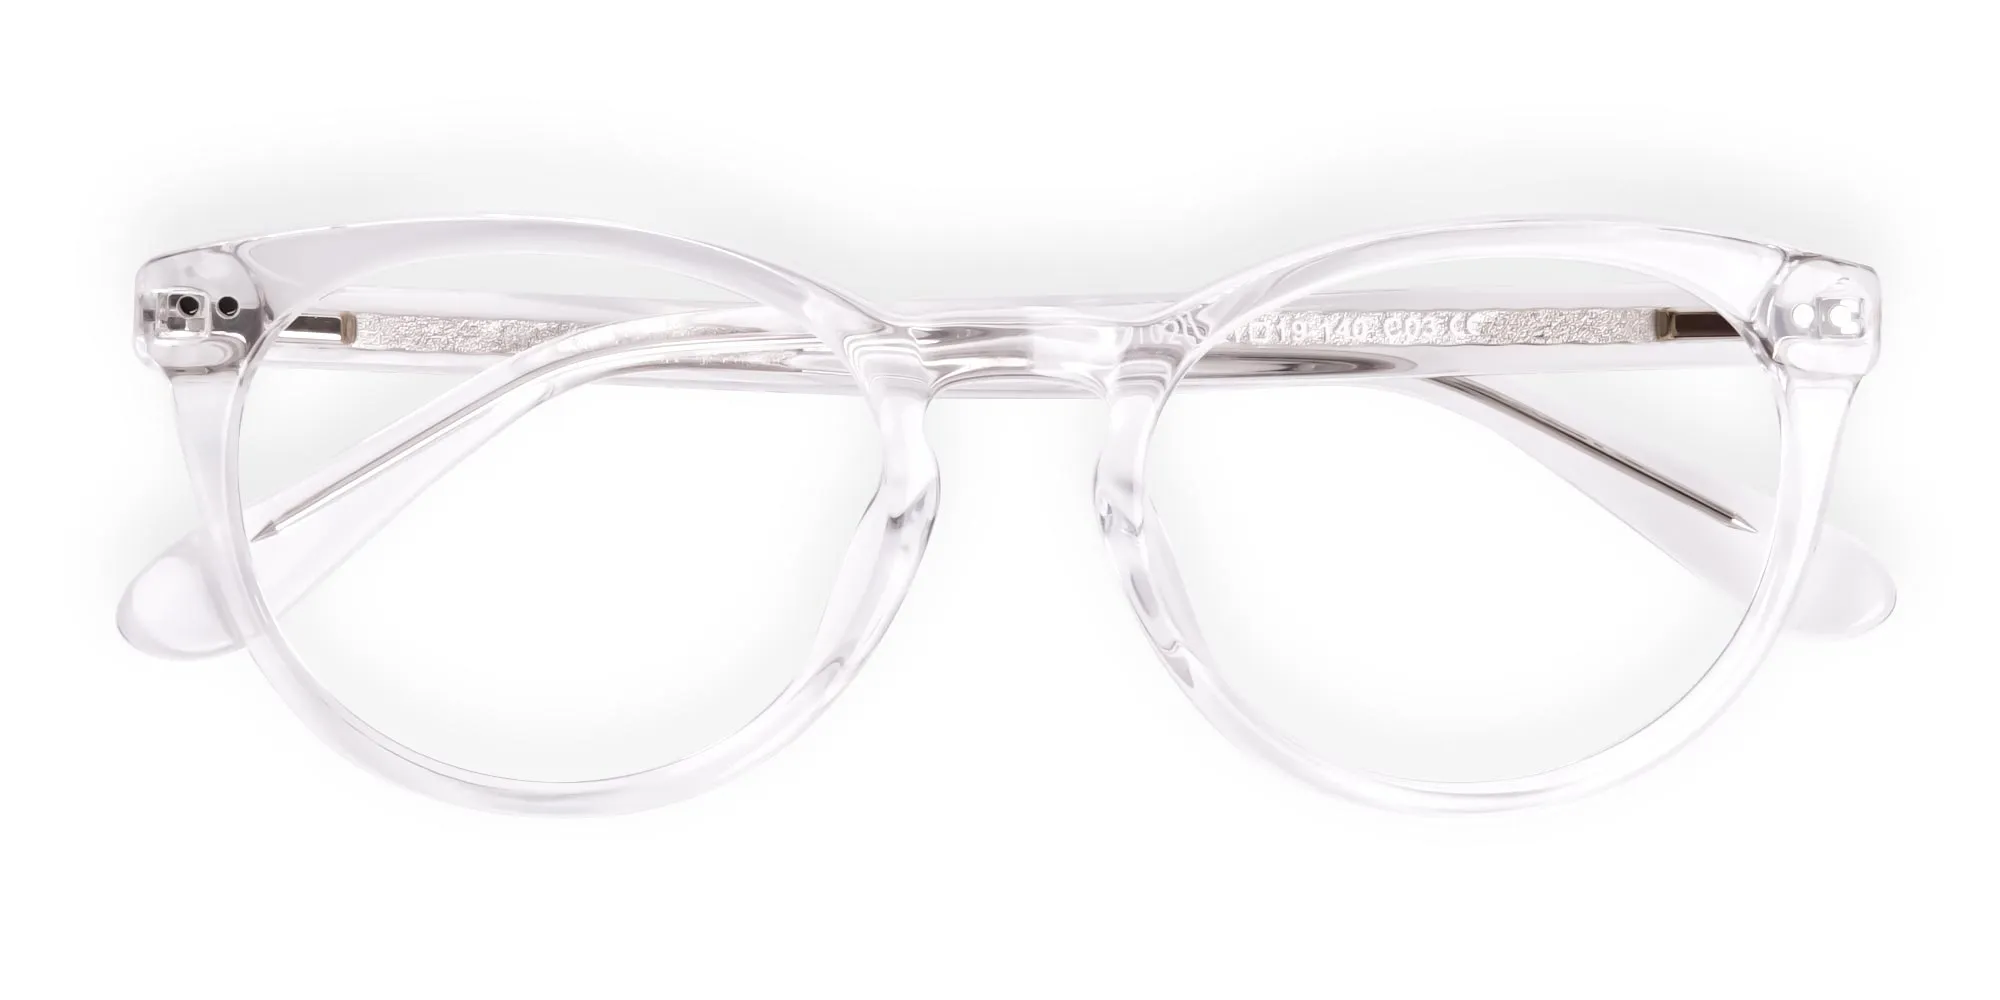 STARLING 3 - Crystal Clear or Transparent Round Glasses | Specscart.®